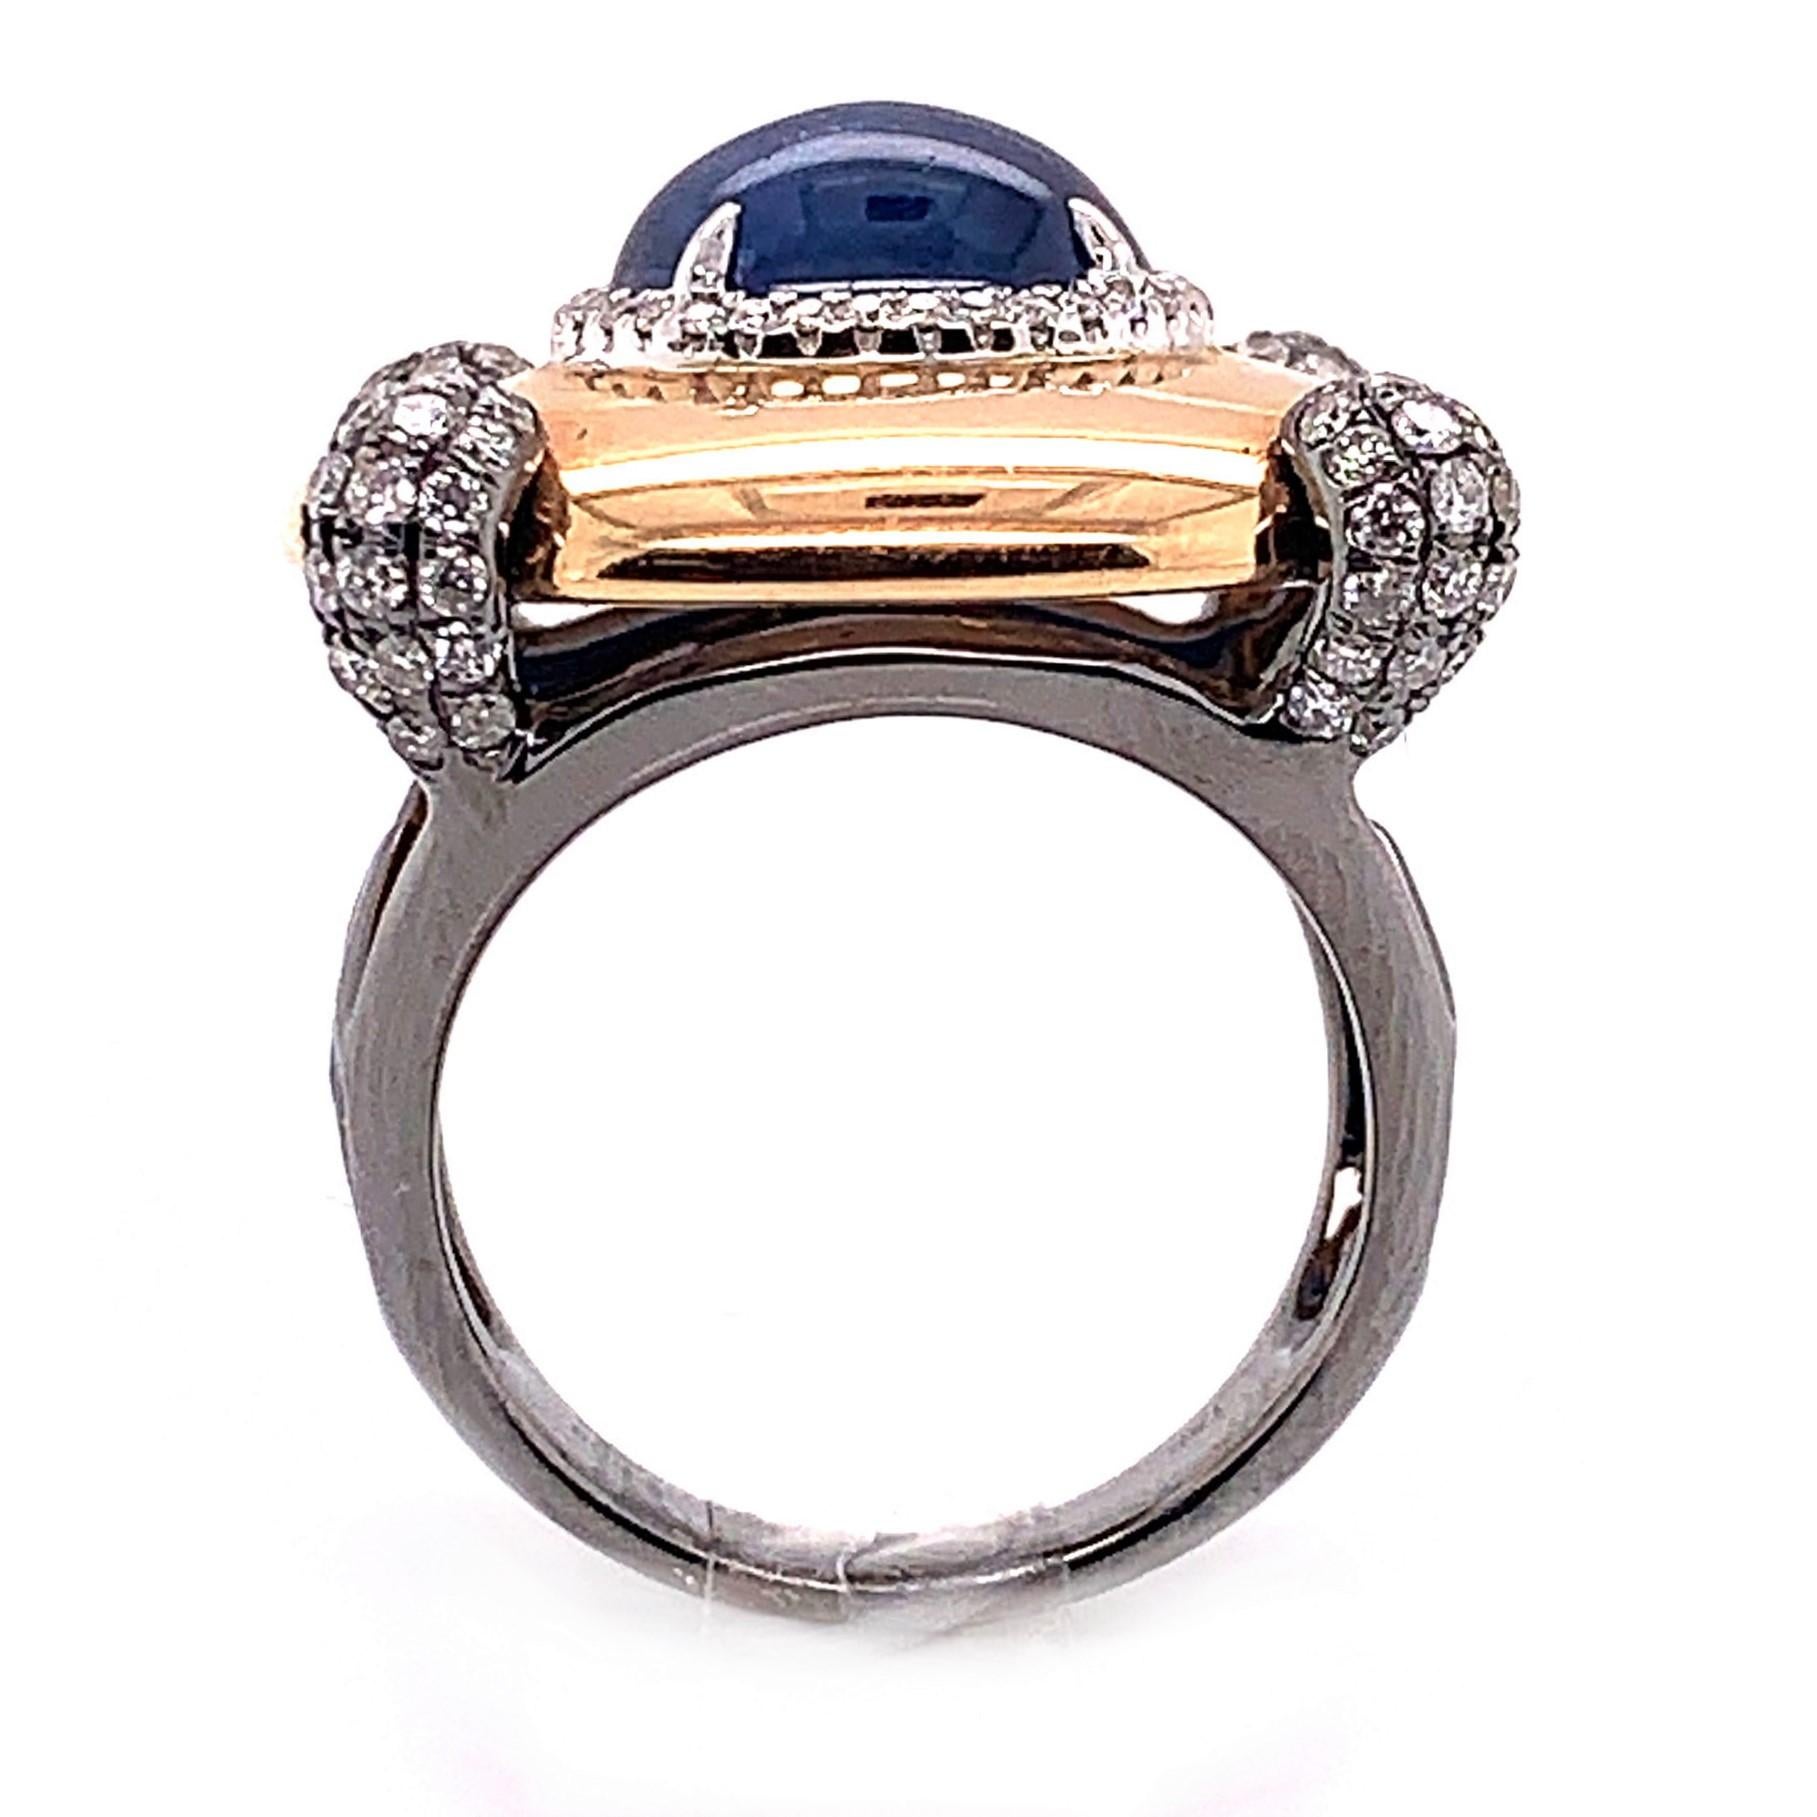 Women's or Men's 4.87 Carat Oval Blue Sapphire and Diamond Ring